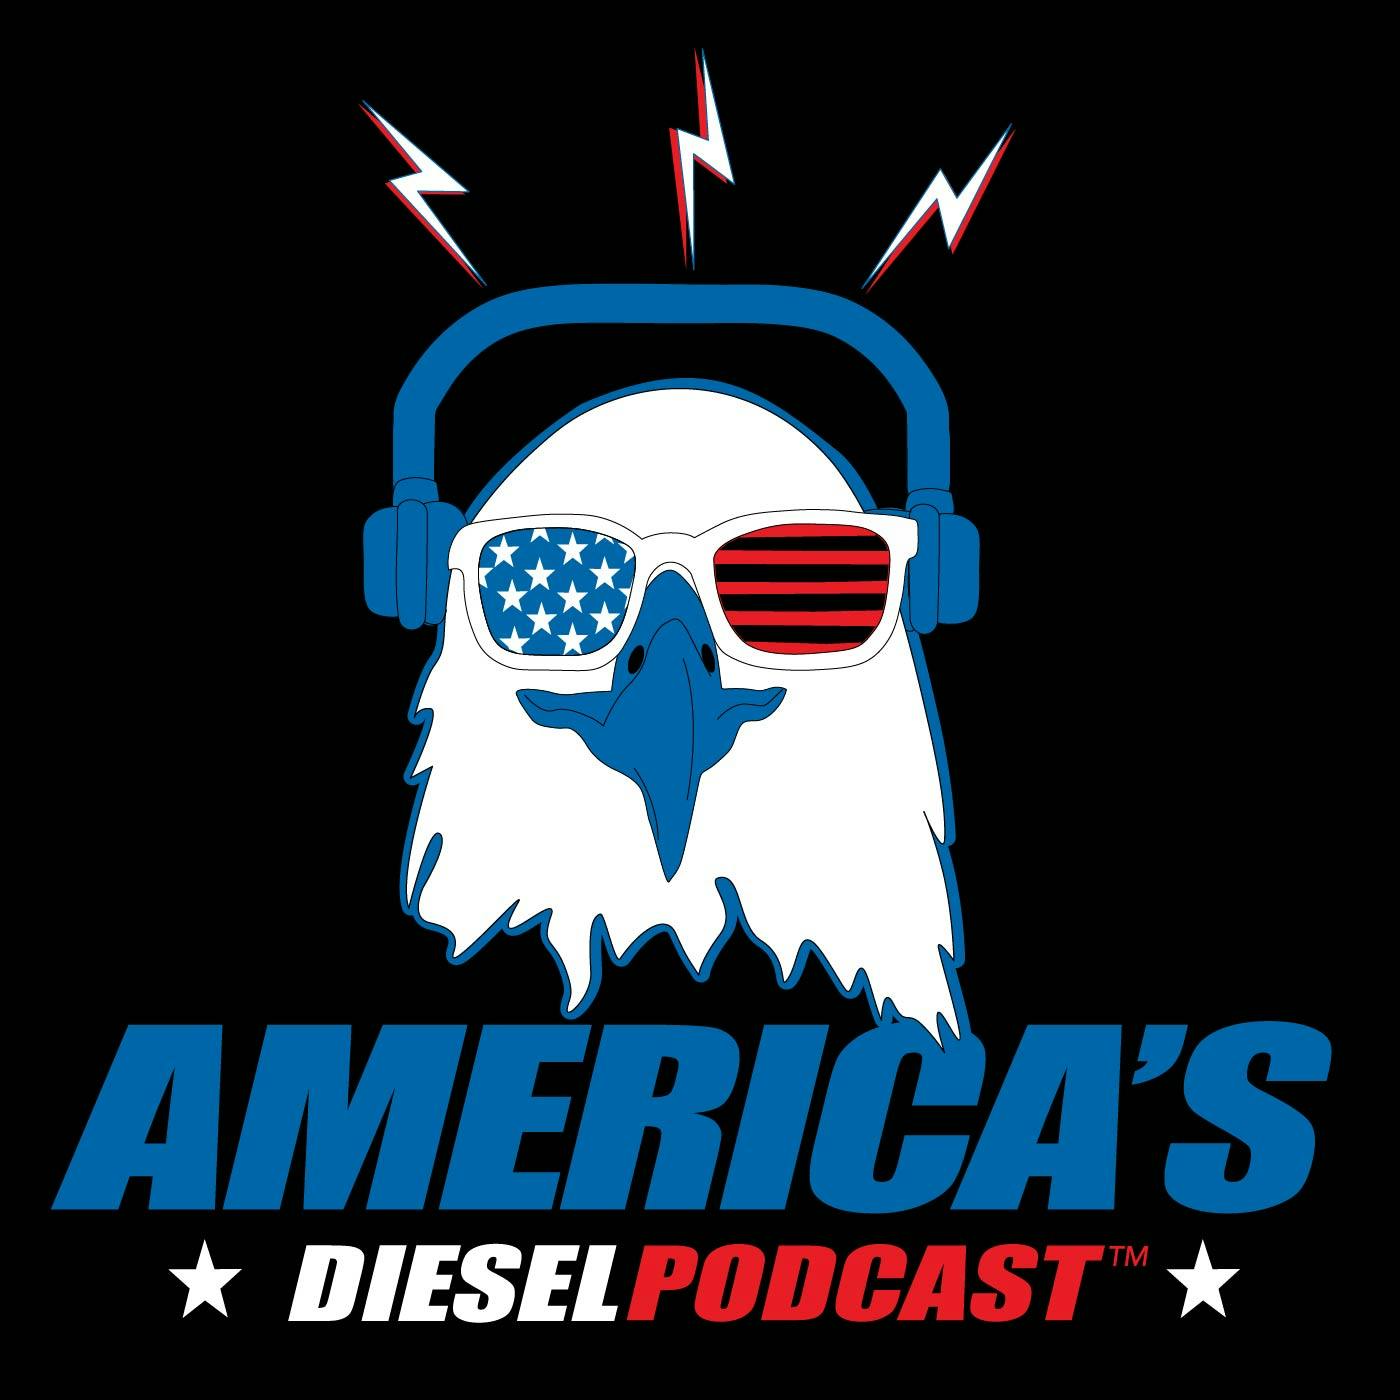 Ep. 138 Top 10 Things to Look for When Buying A Used Diesel Truck